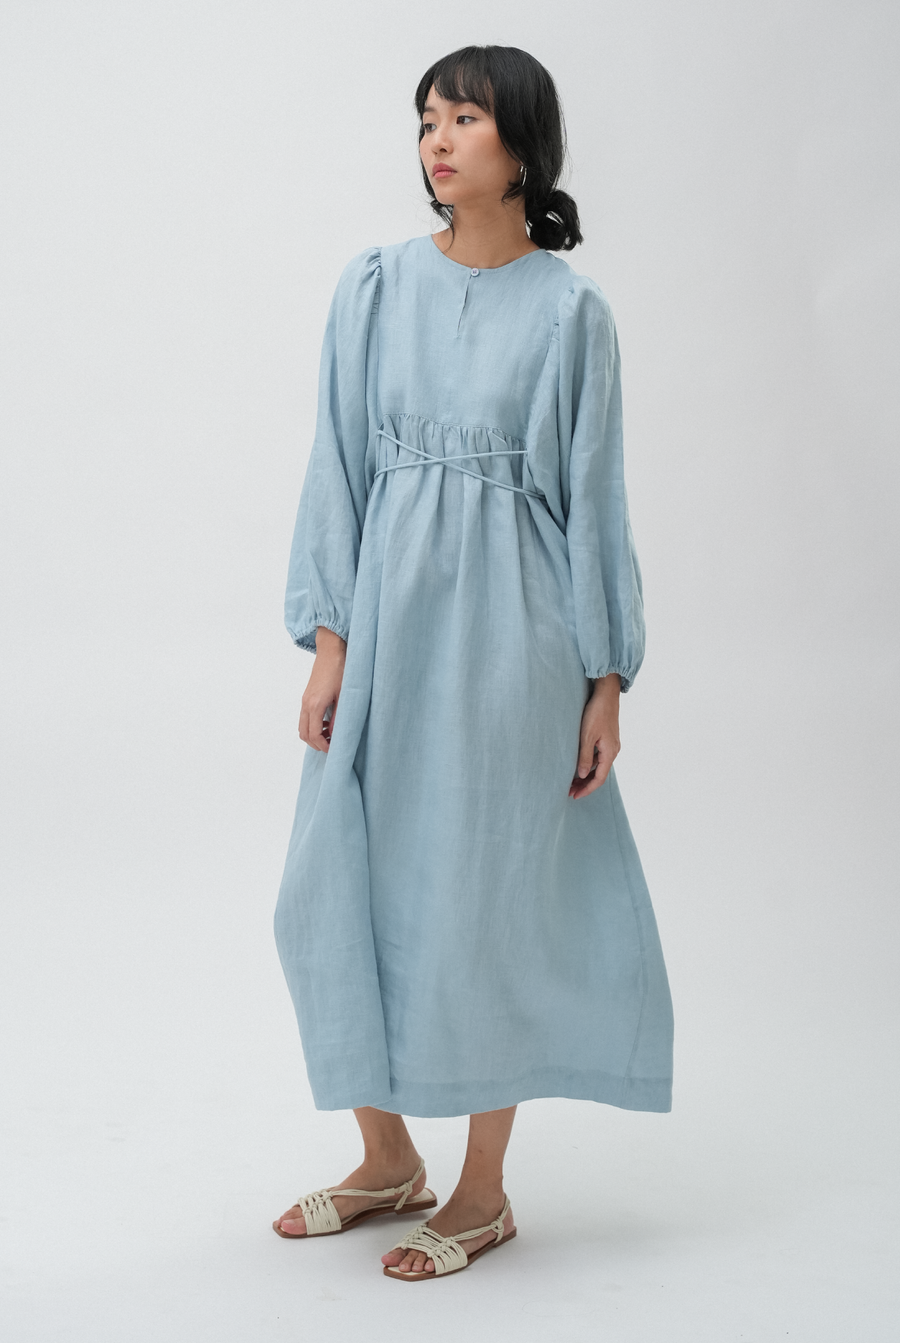 Daydream Linen Dress in Coral Blue